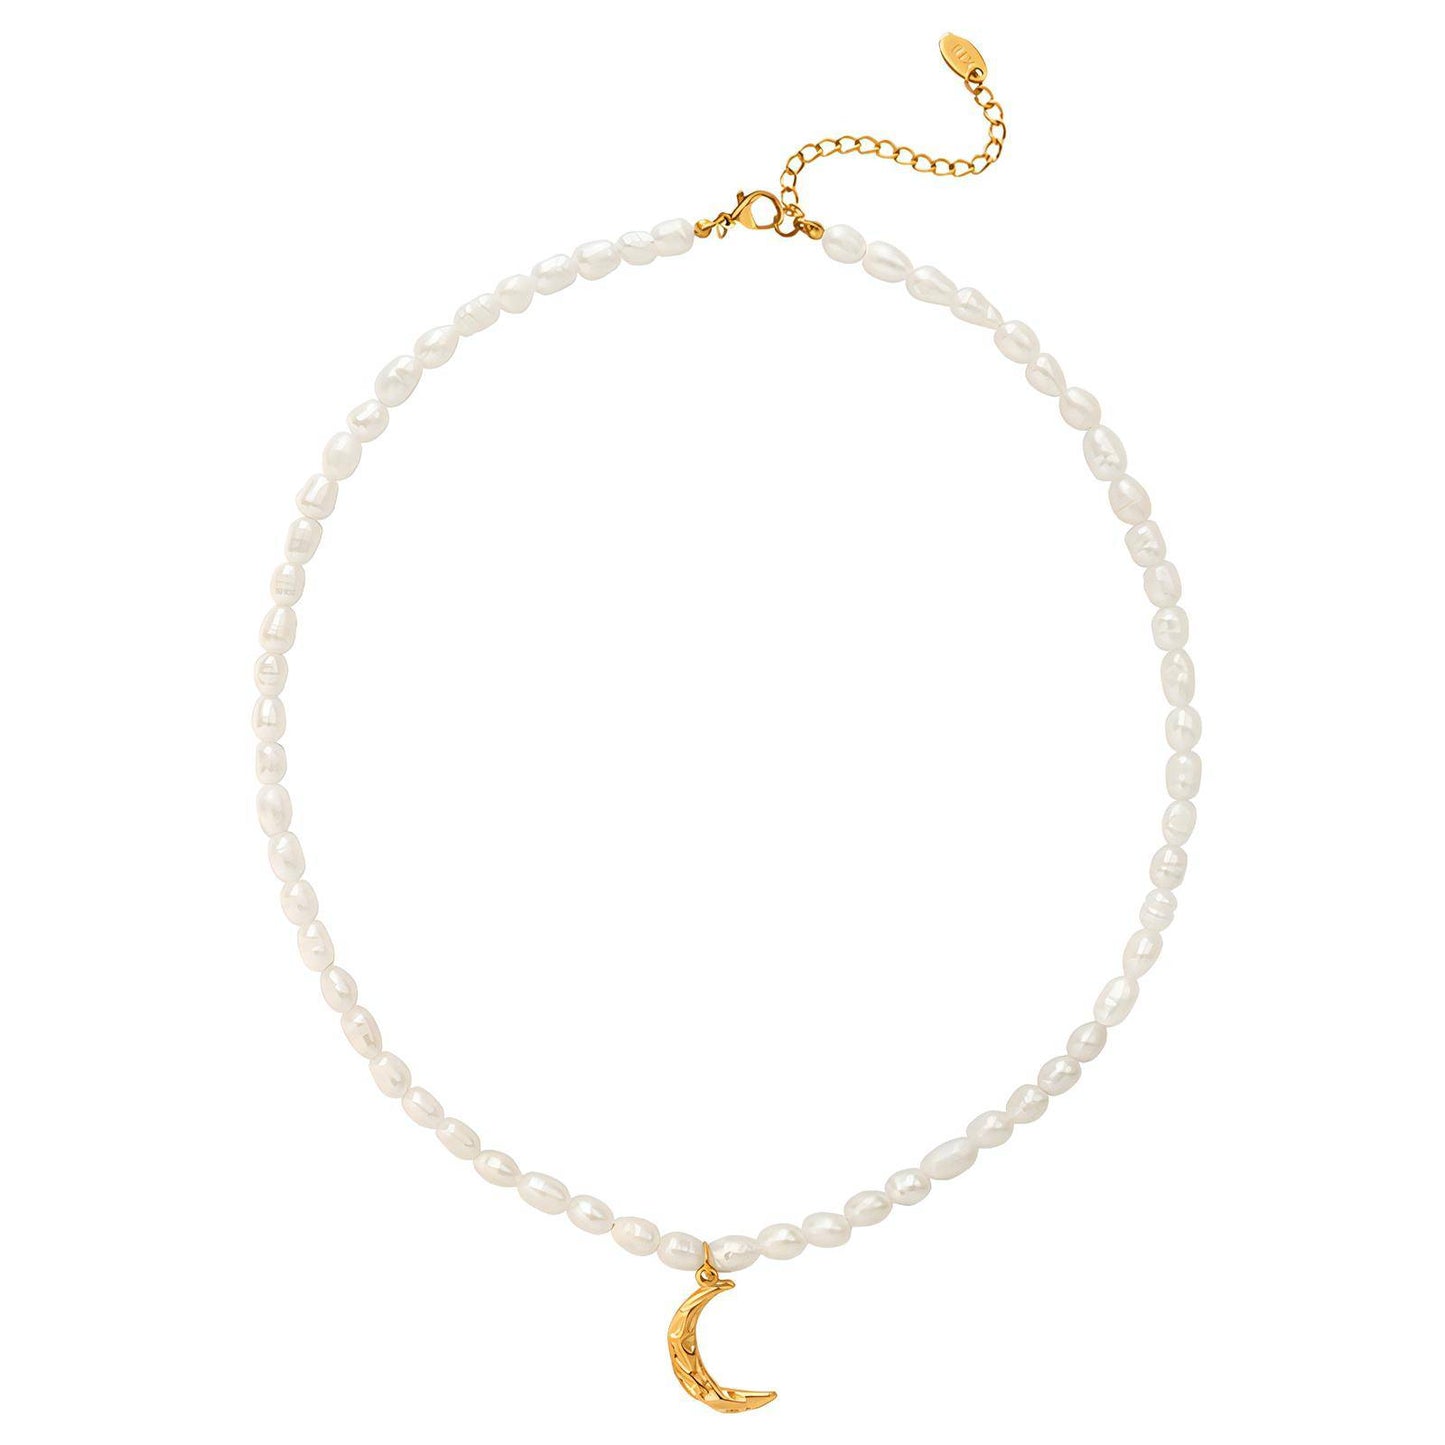 18K gold plated Stainless steel  Crescent necklace